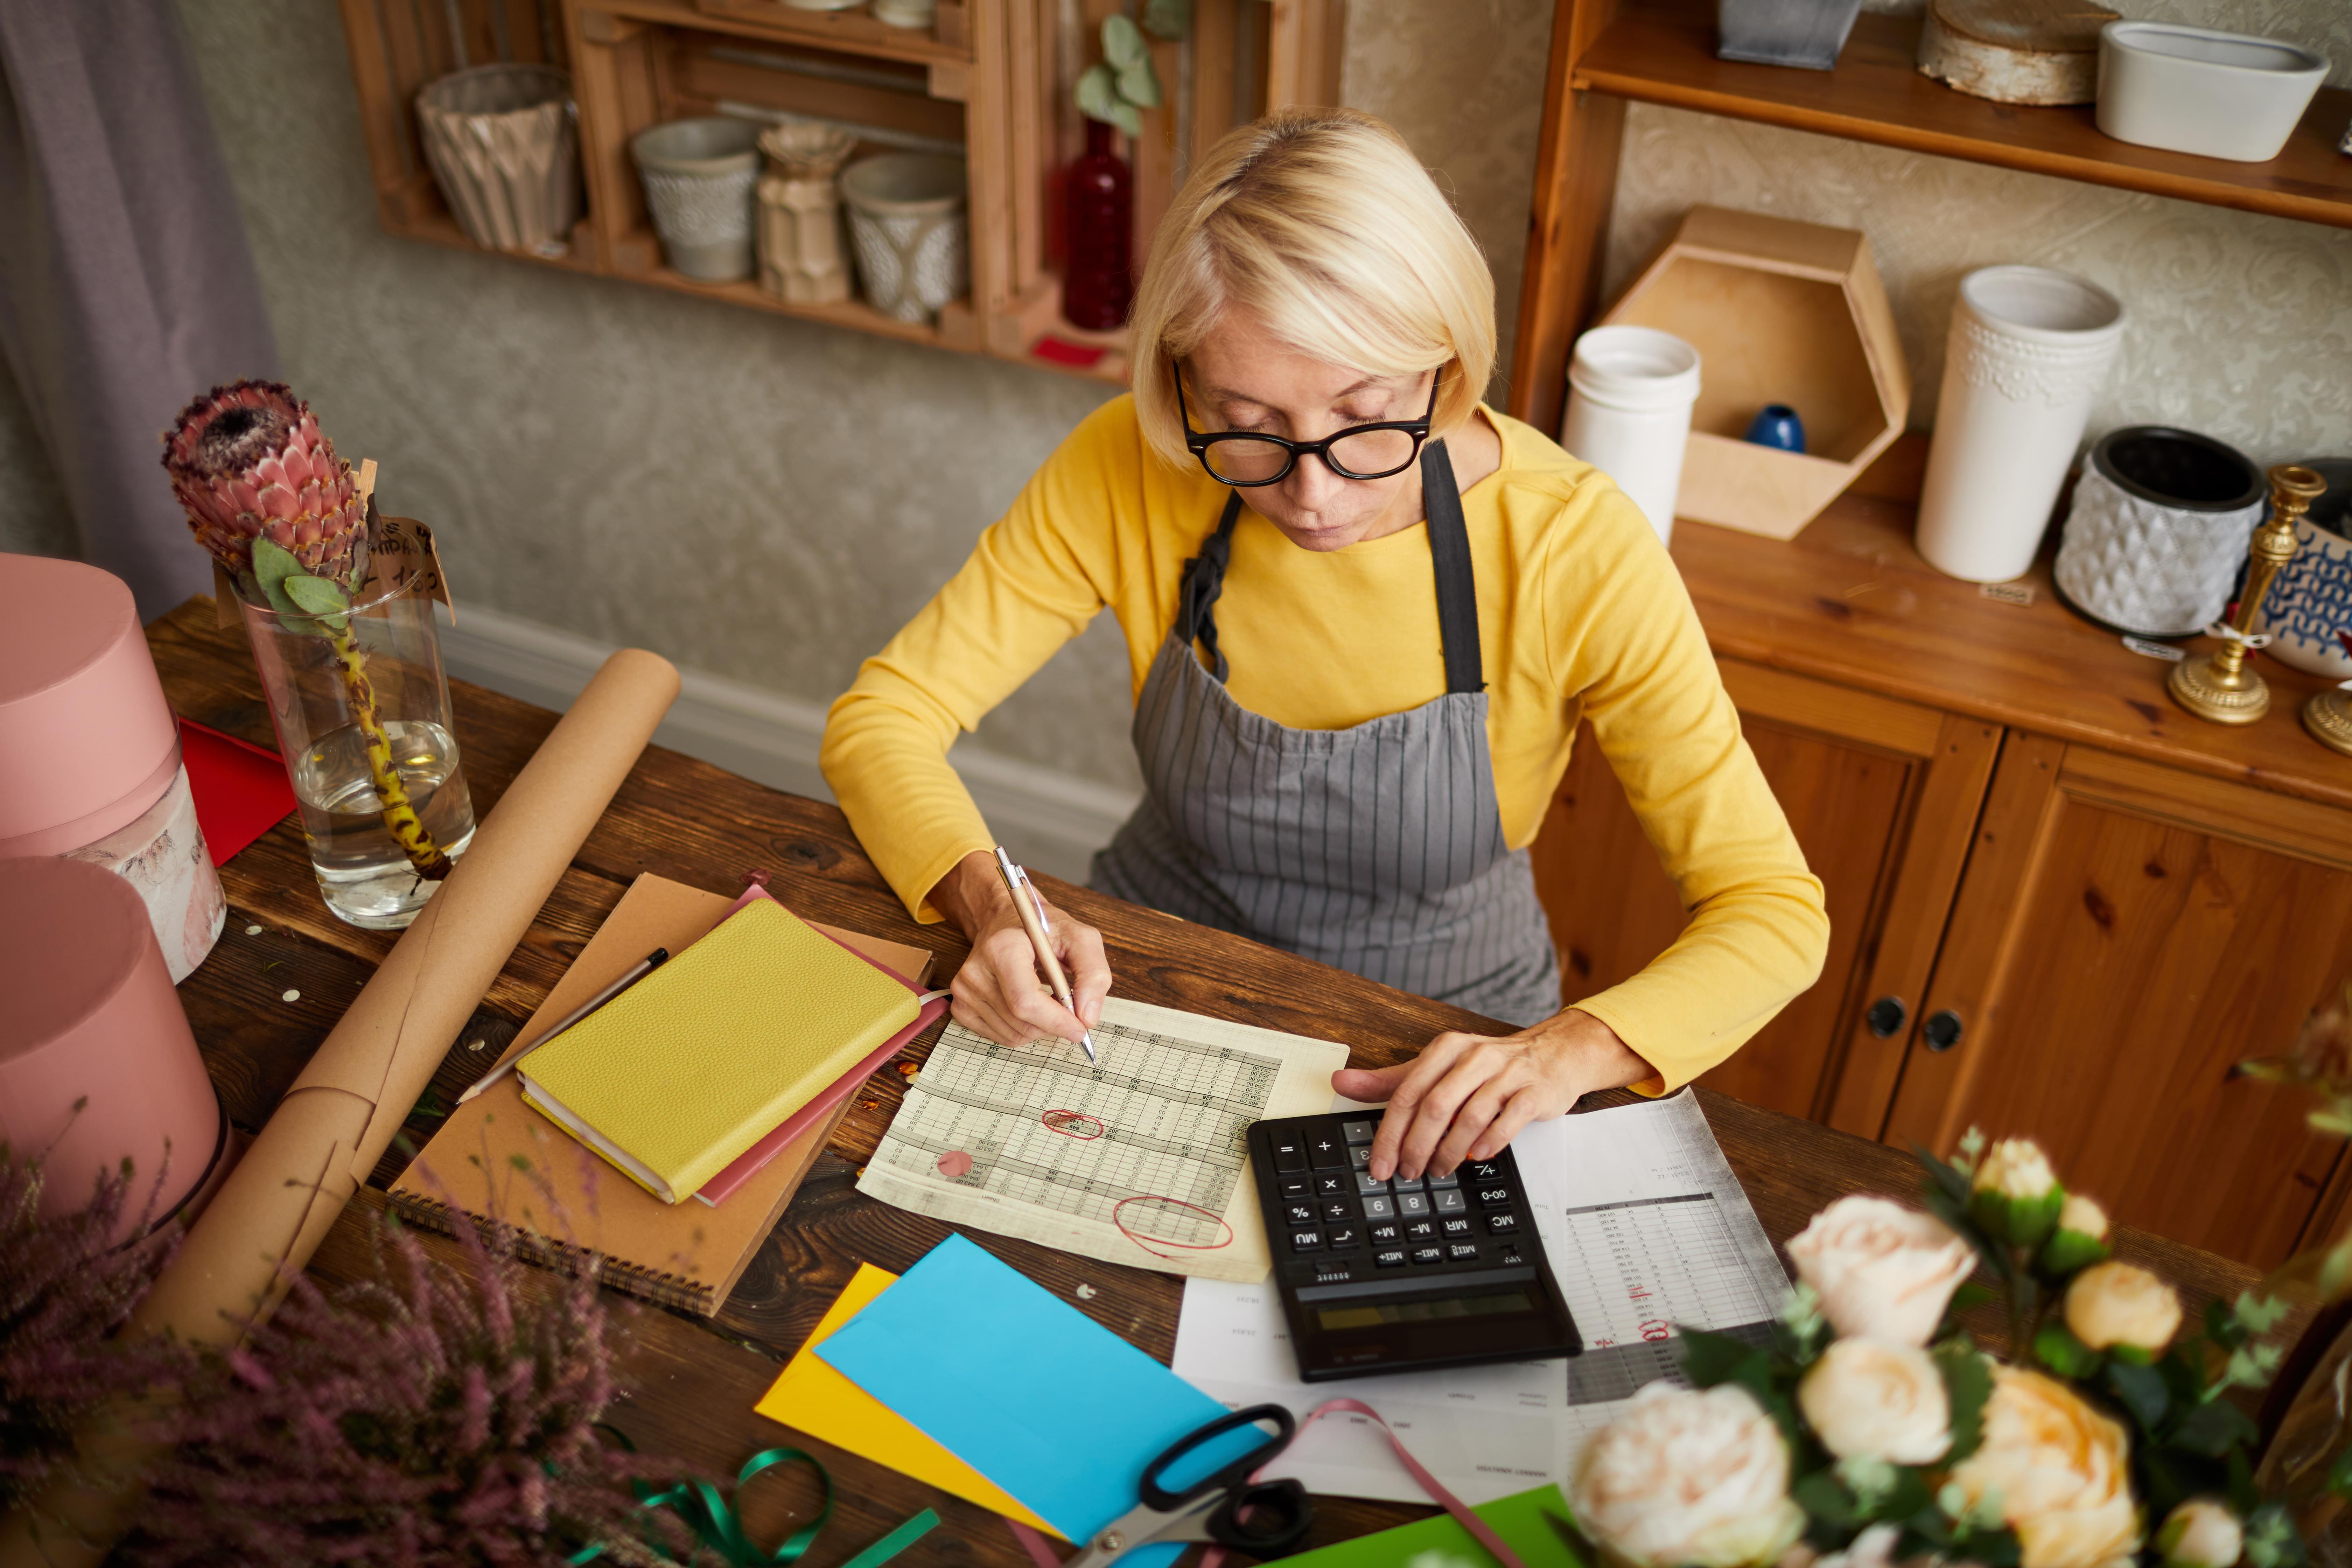 Use Quickbooks or quicken for small business accounting.